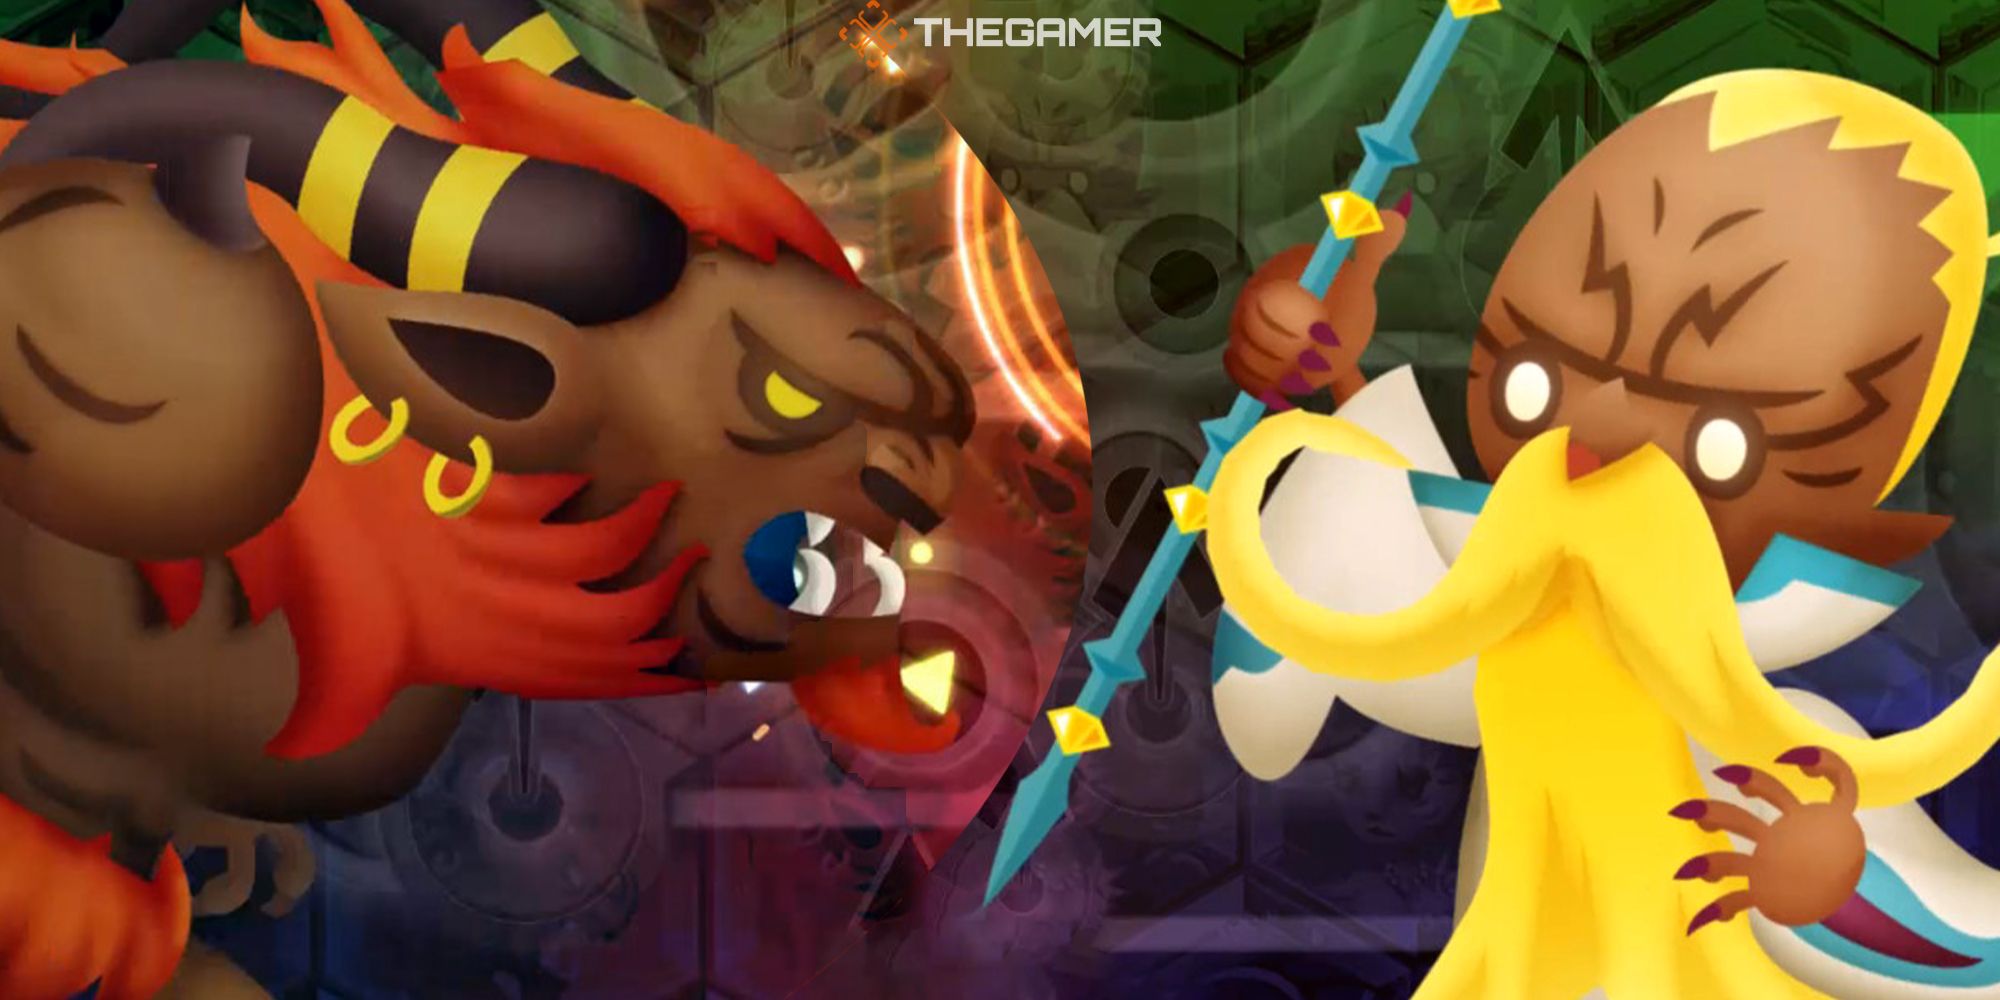 Ifrit and Ramuh face each other against a colorful background in Theatrhythm: Final Bar Line.